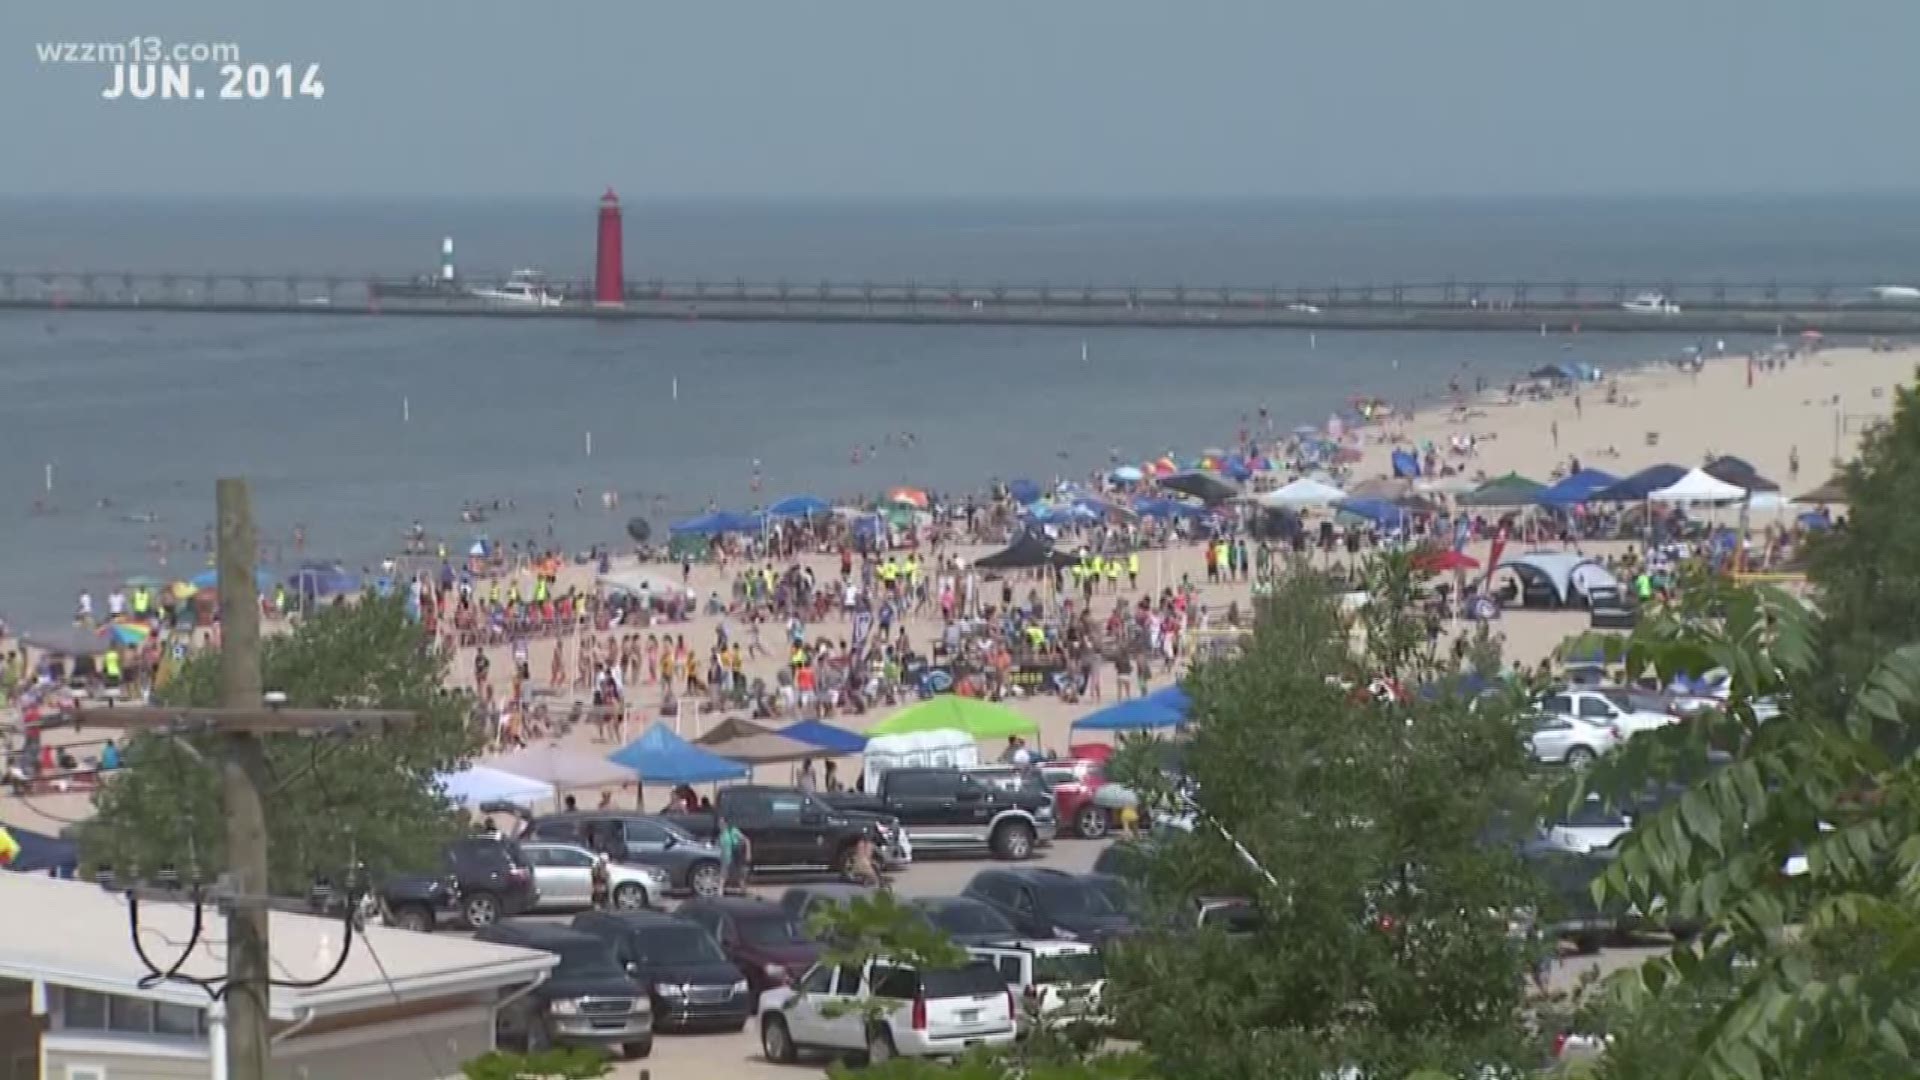 Grand Haven braces for summer's second busiest weekend